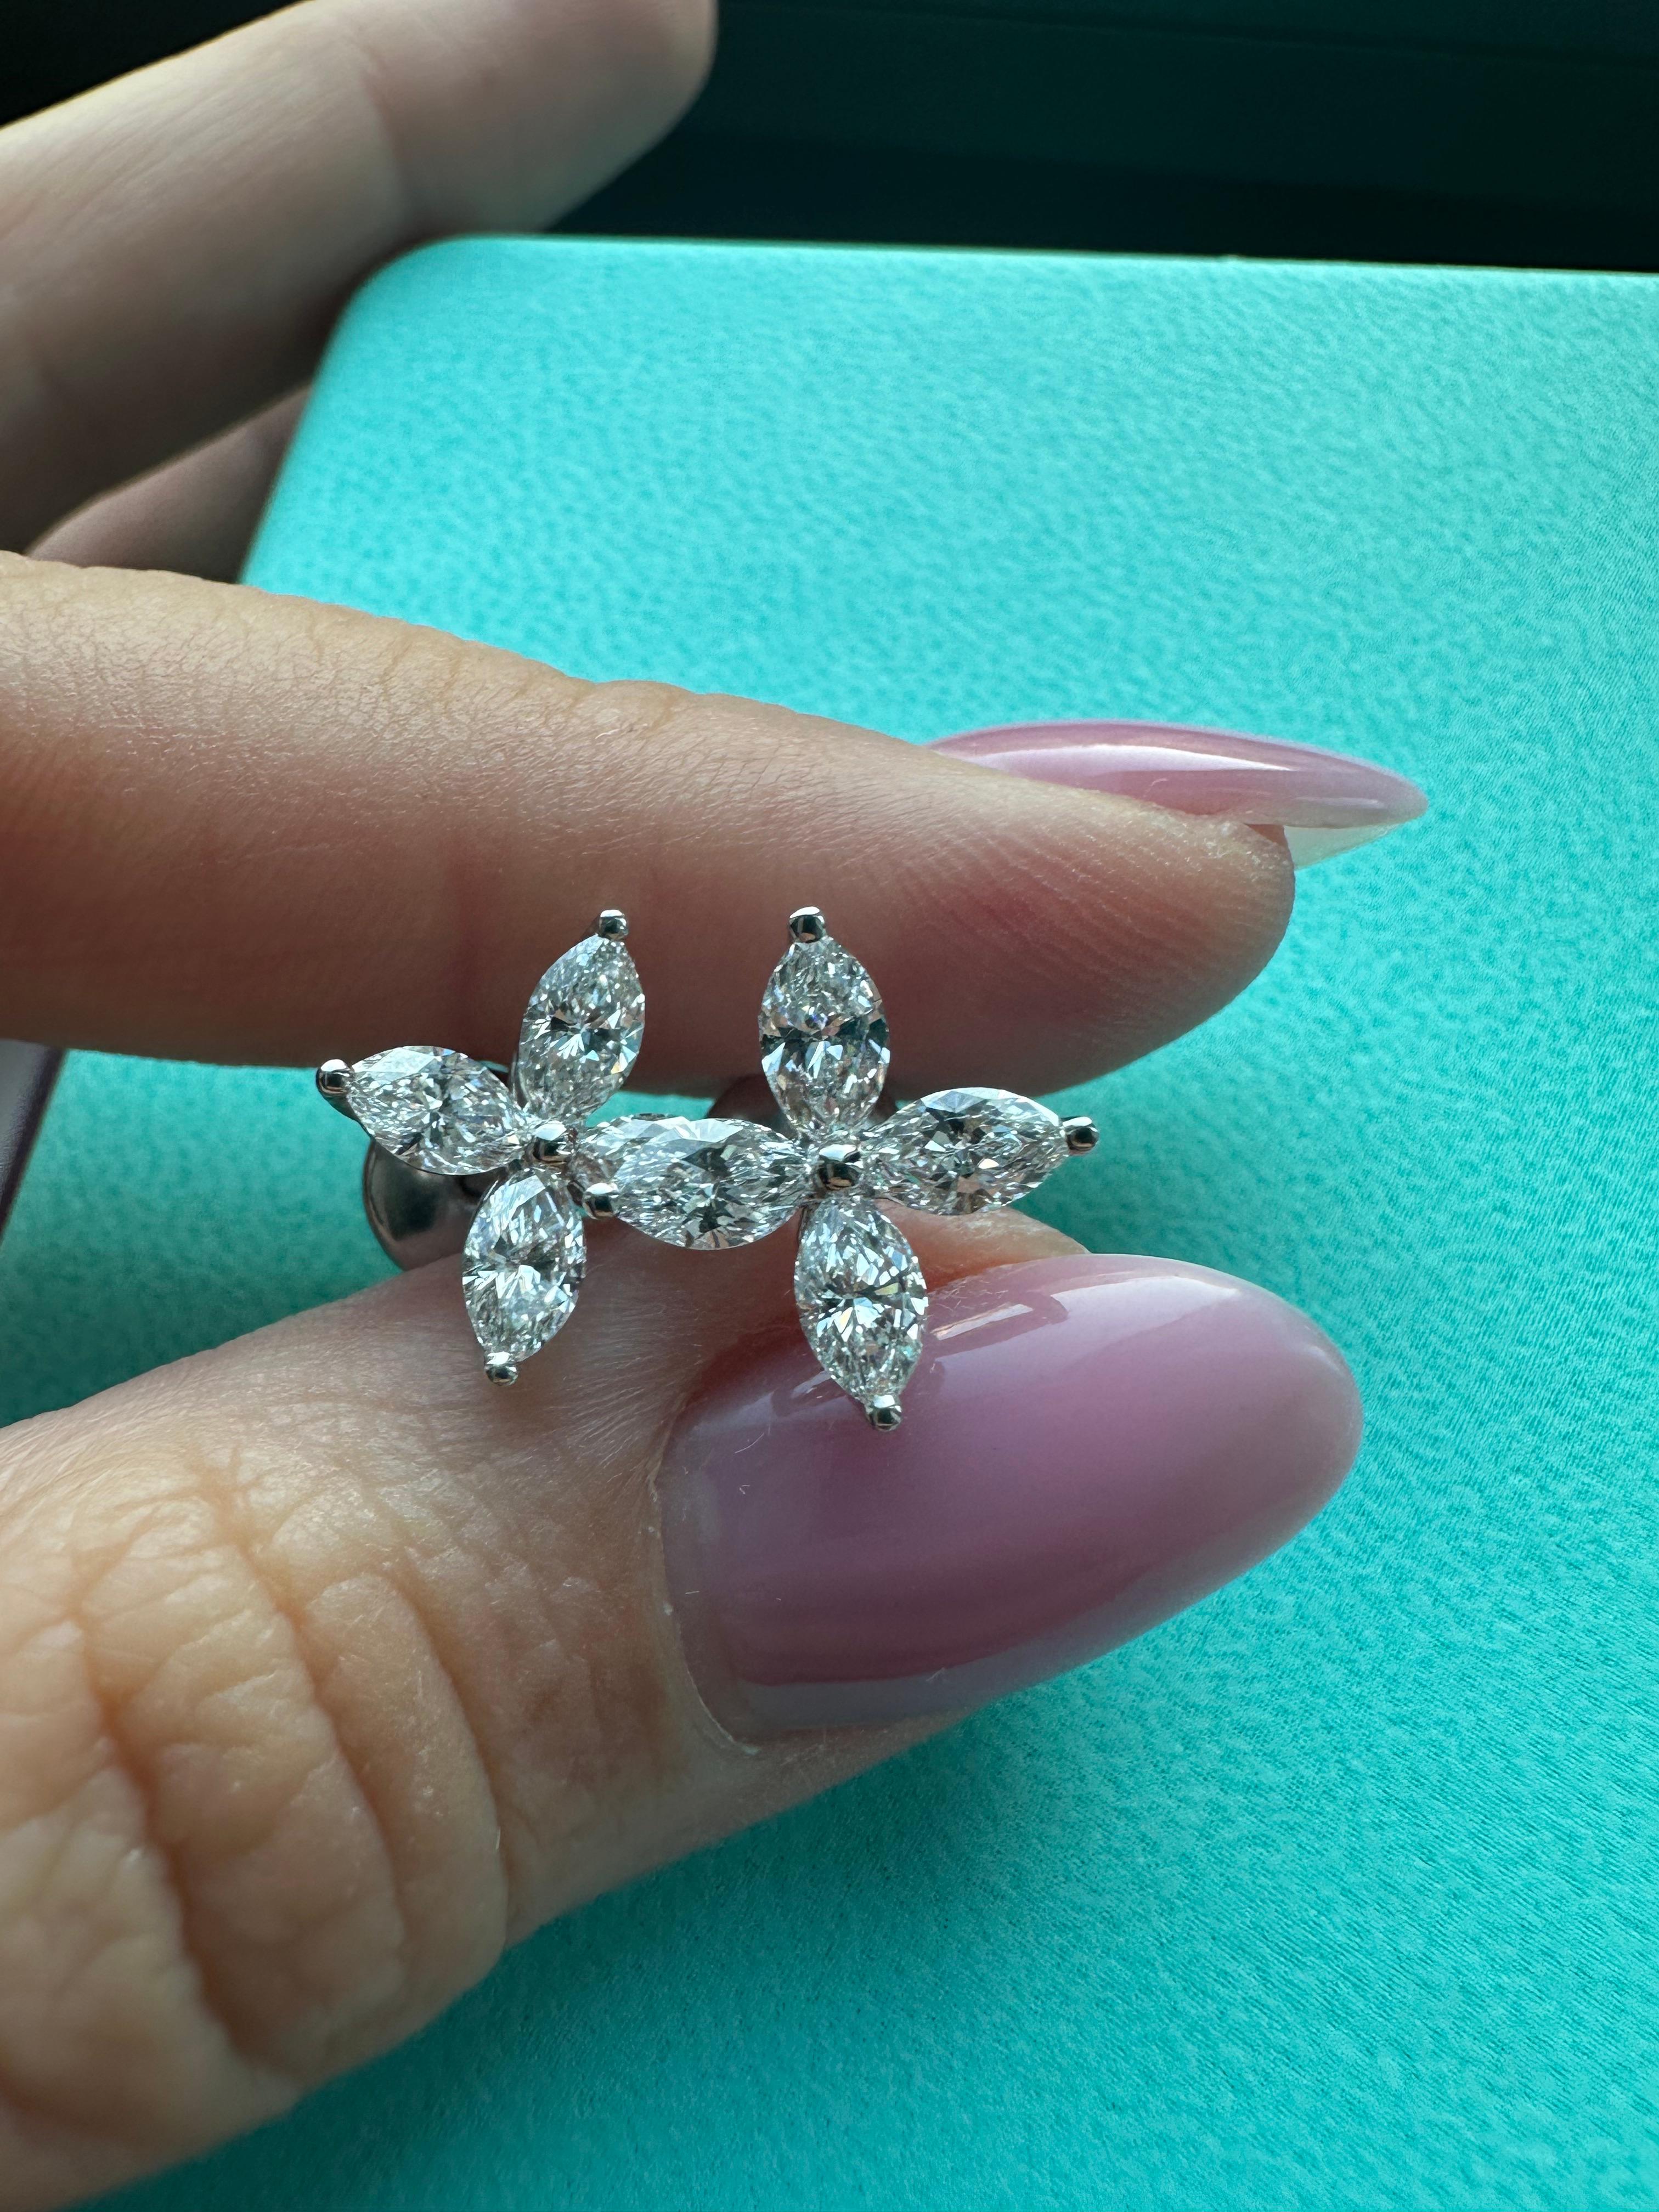 Tiffany Co Victoria Large Earrings made of platinum PT950 with diamonds 
Marquise diamonds weighing 1.62 ctw 
Never been modified or repaired, polished once 
Come with the box 
Retail price: $27,200

